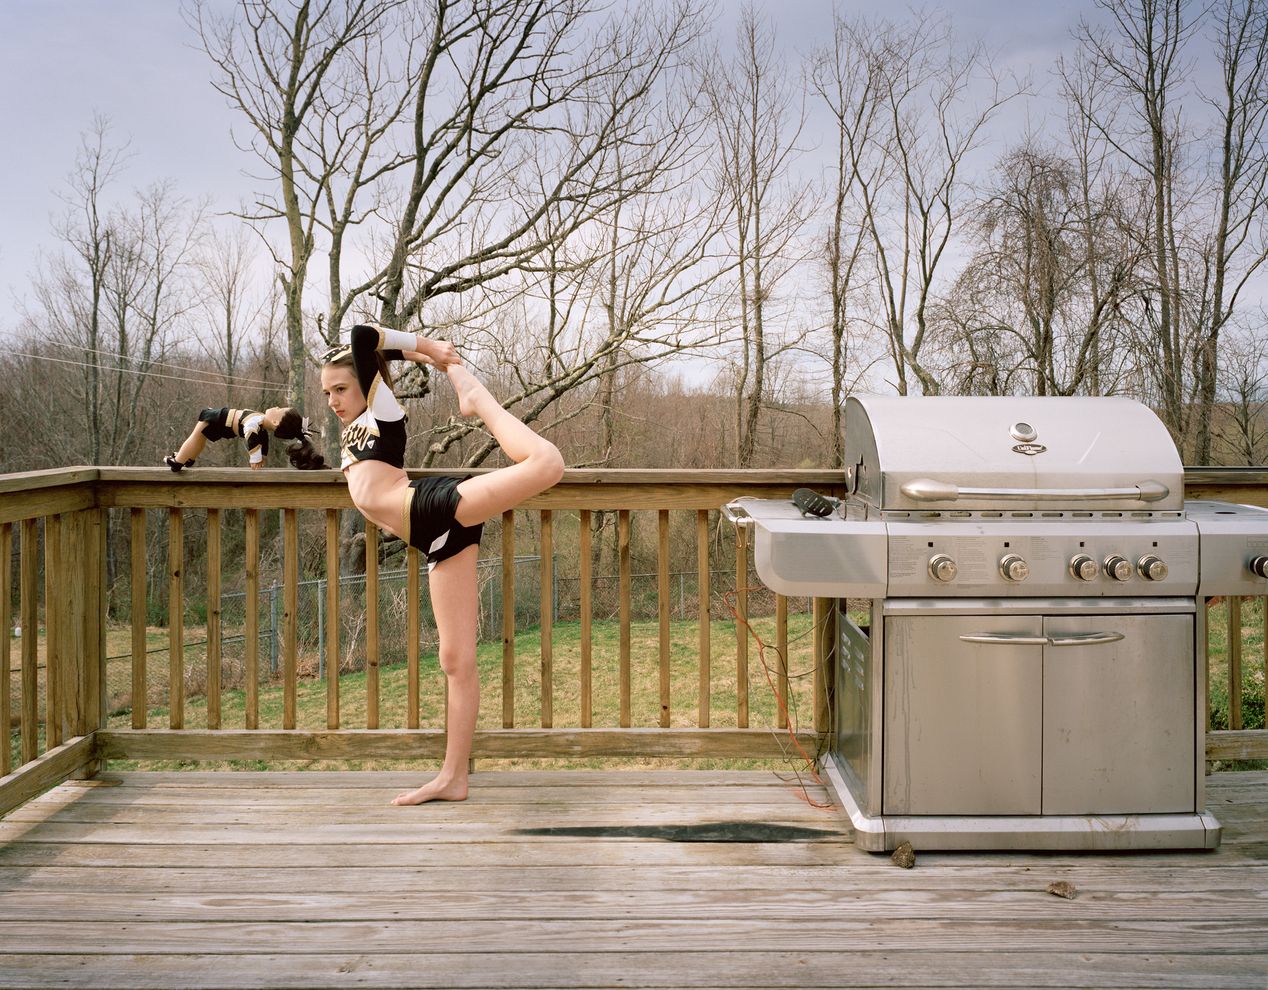 Young athlete and her lookalike doll are posing on a deck next to a large barbeque grill, environmental portrait photography, Ilona Szwarc, contemporary Los Angeles artist.